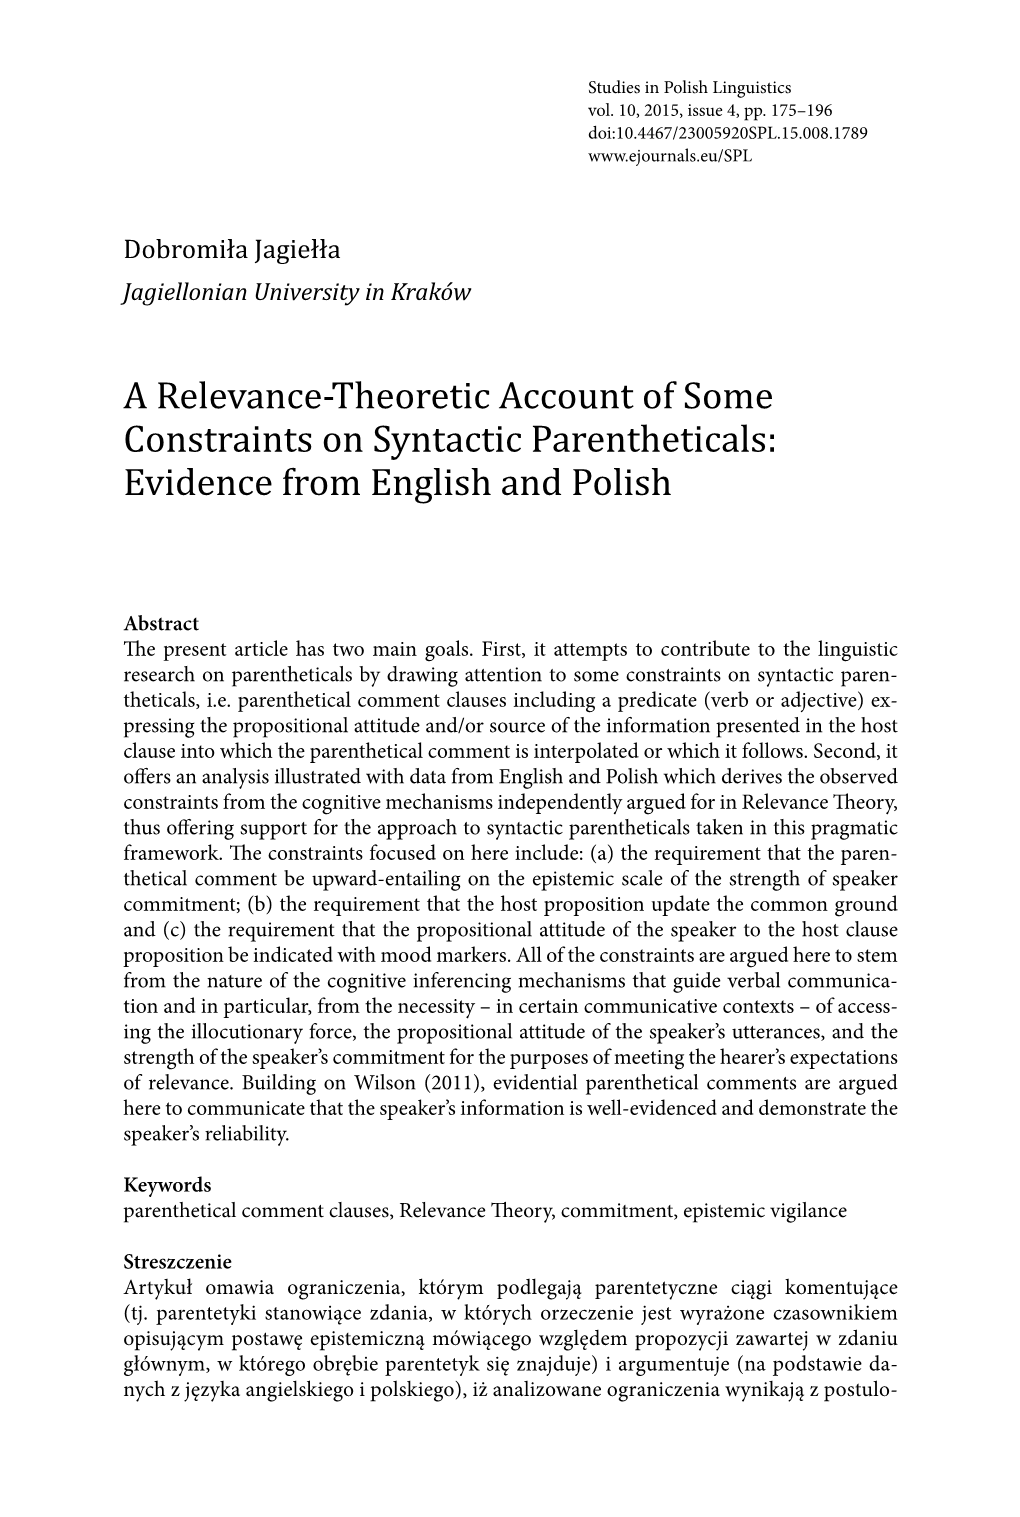 A Relevance-Theoretic Account of Some Constraints on Syntactic Parentheticals